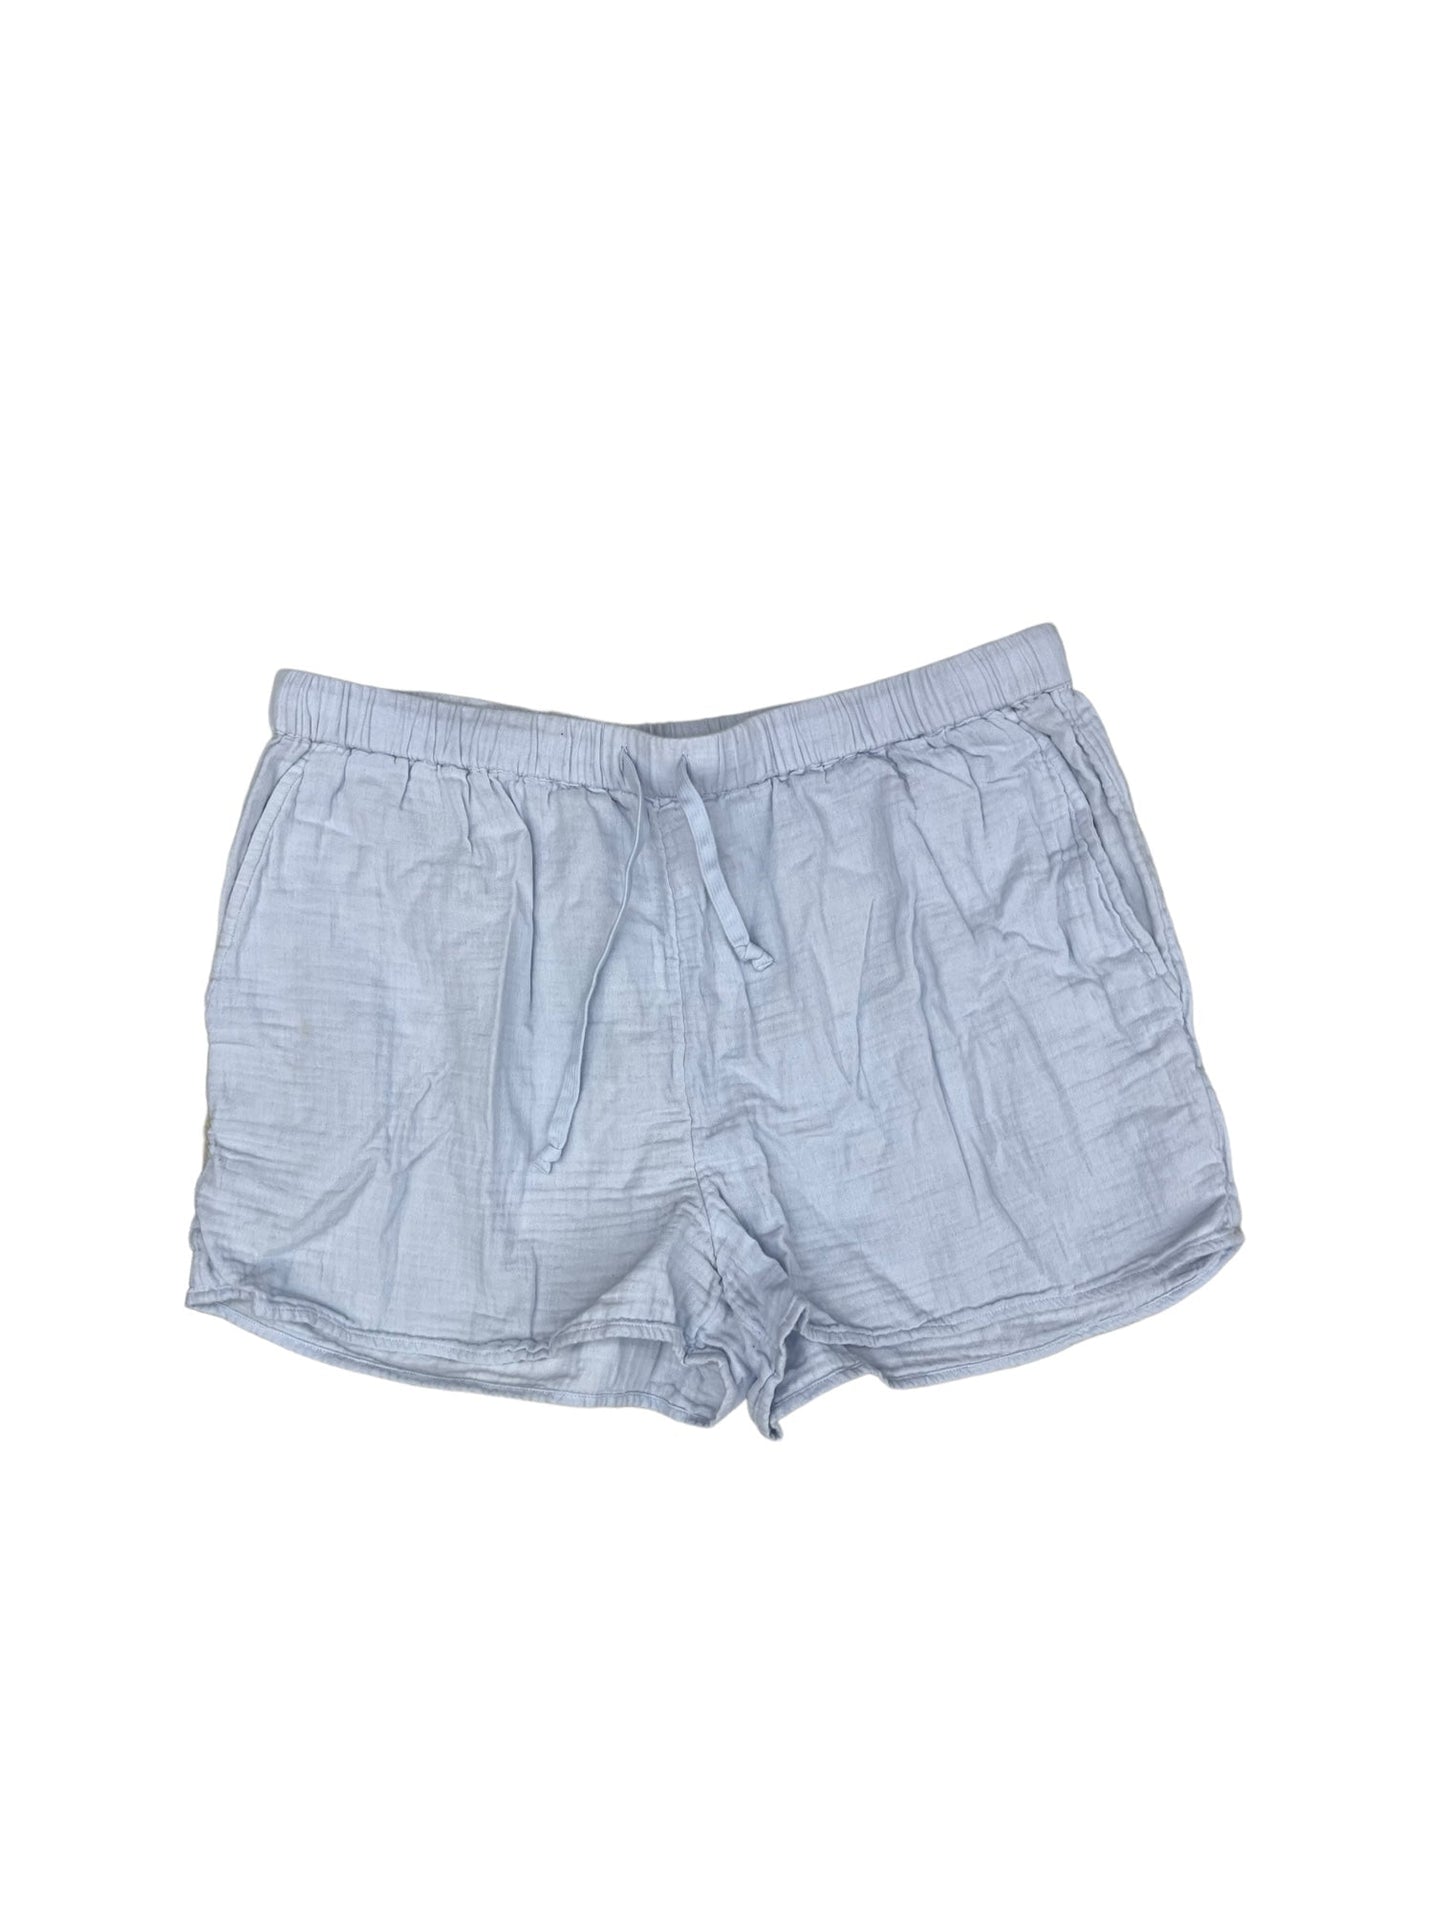 Shorts By Wilfred  Size: L